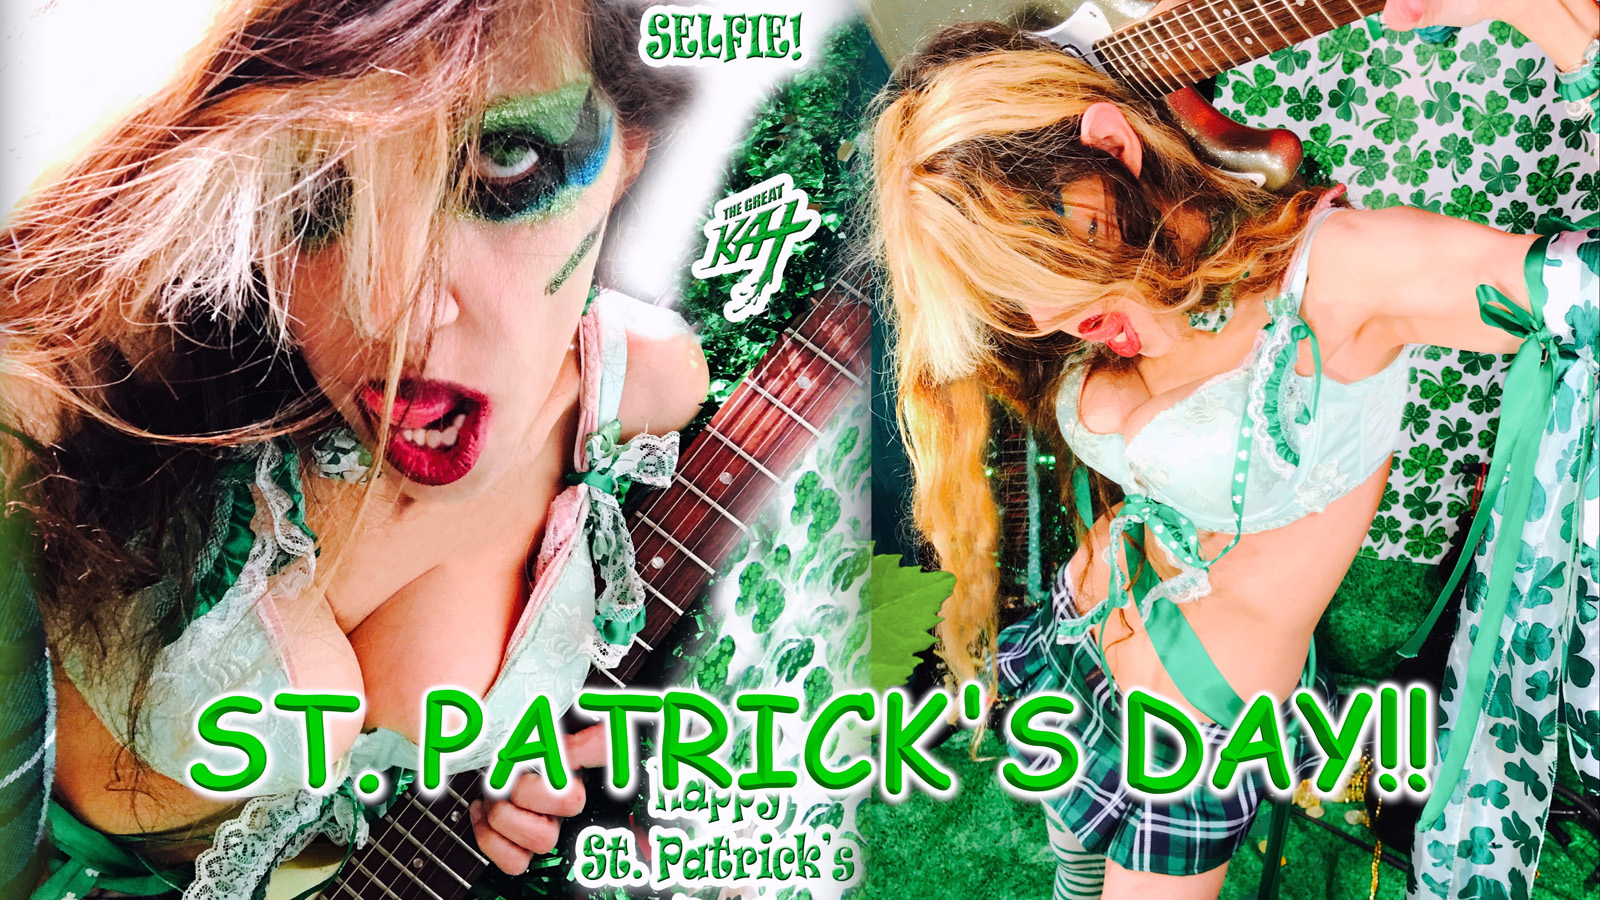 THE GREAT KAT'S "TOP 20 HOT SHRED HOLIDAYS!" "ST. PATRICK'S DAY!" From The Great Kat's NEW DVD!!!!